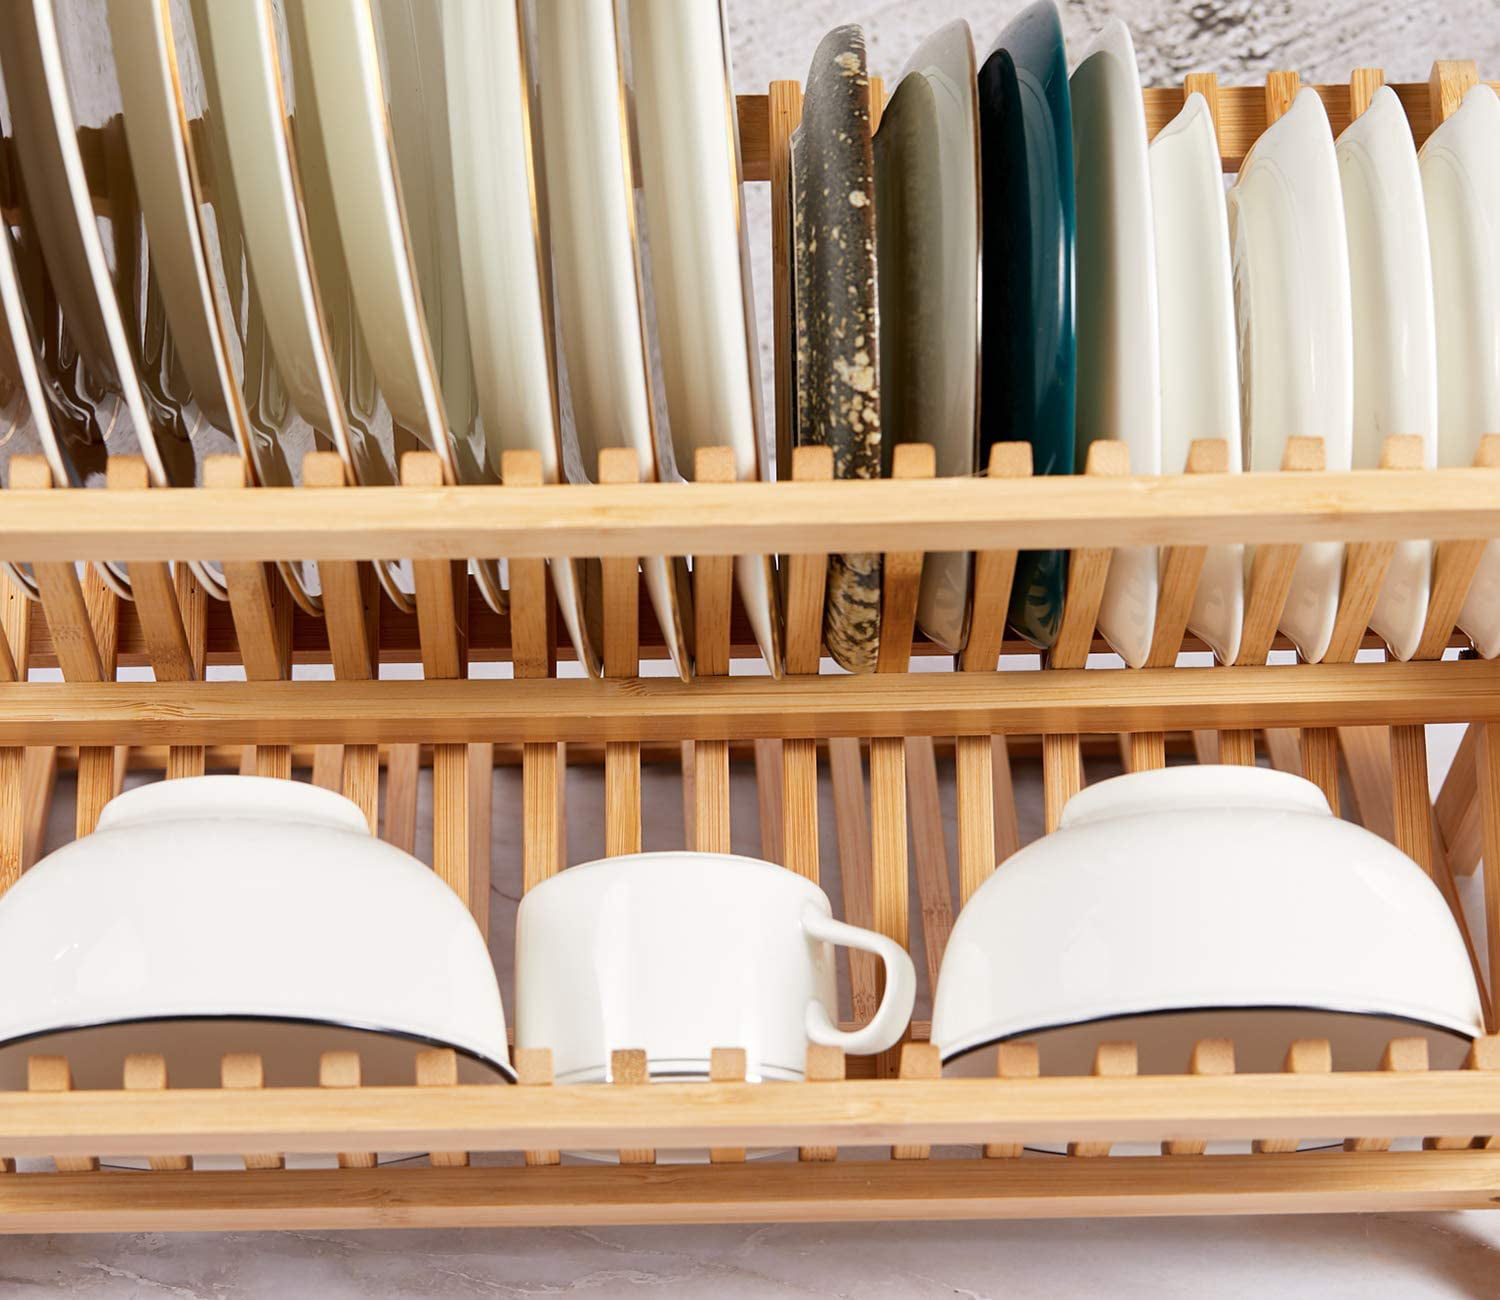 Collapsible Bamboo Dish Drying Rack – Totally Bamboo